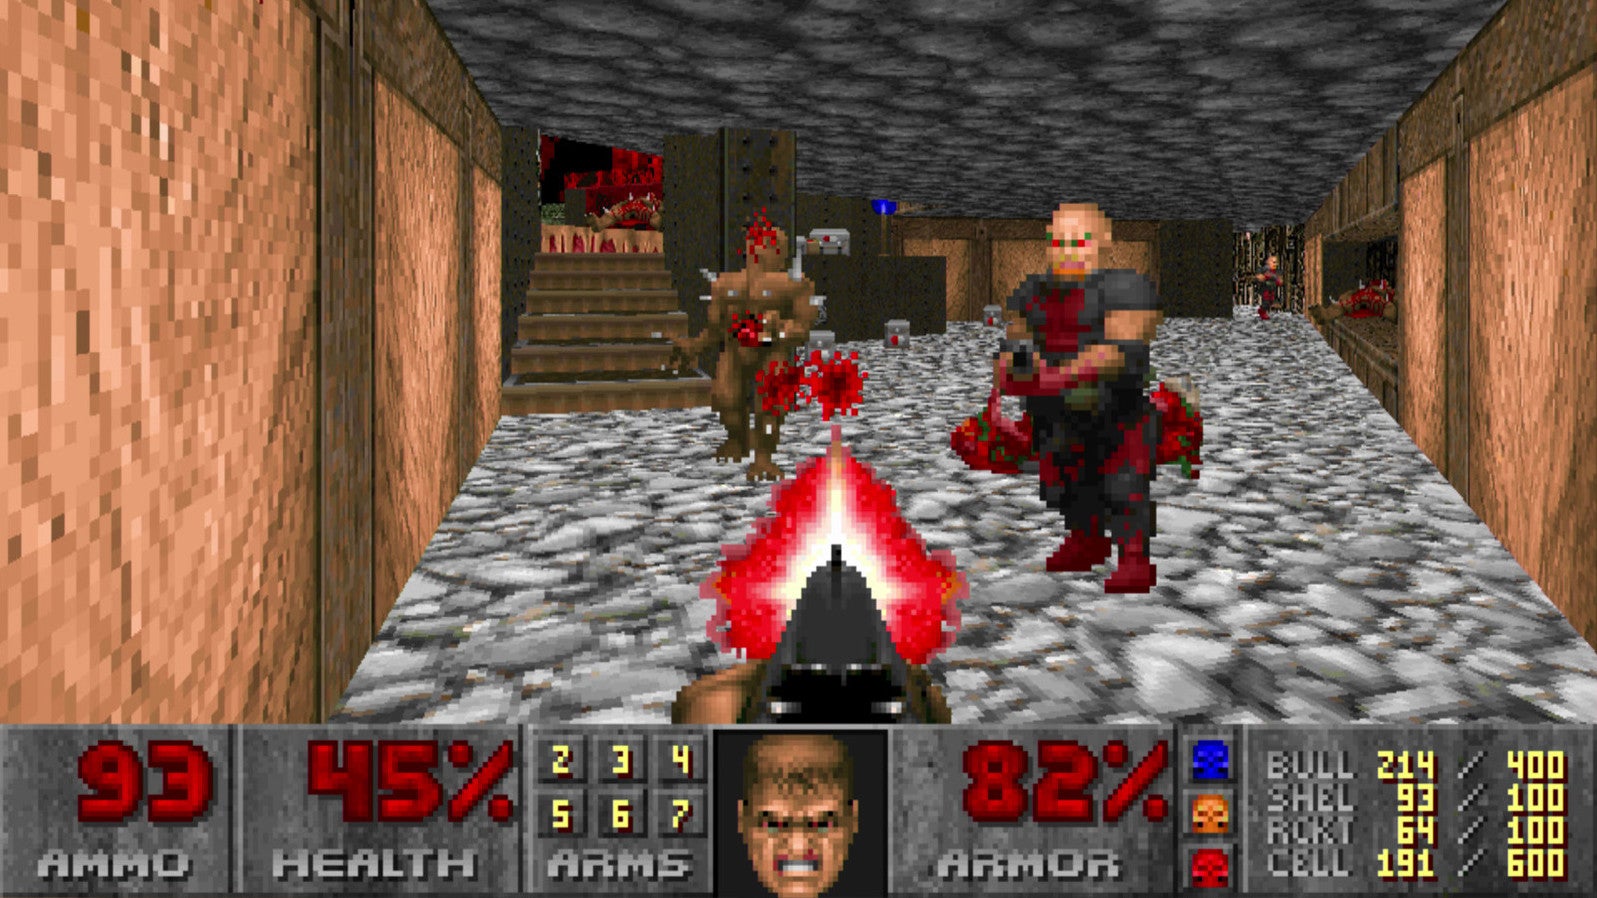 Improve your doomscrolling with the bot tweeting through Doom